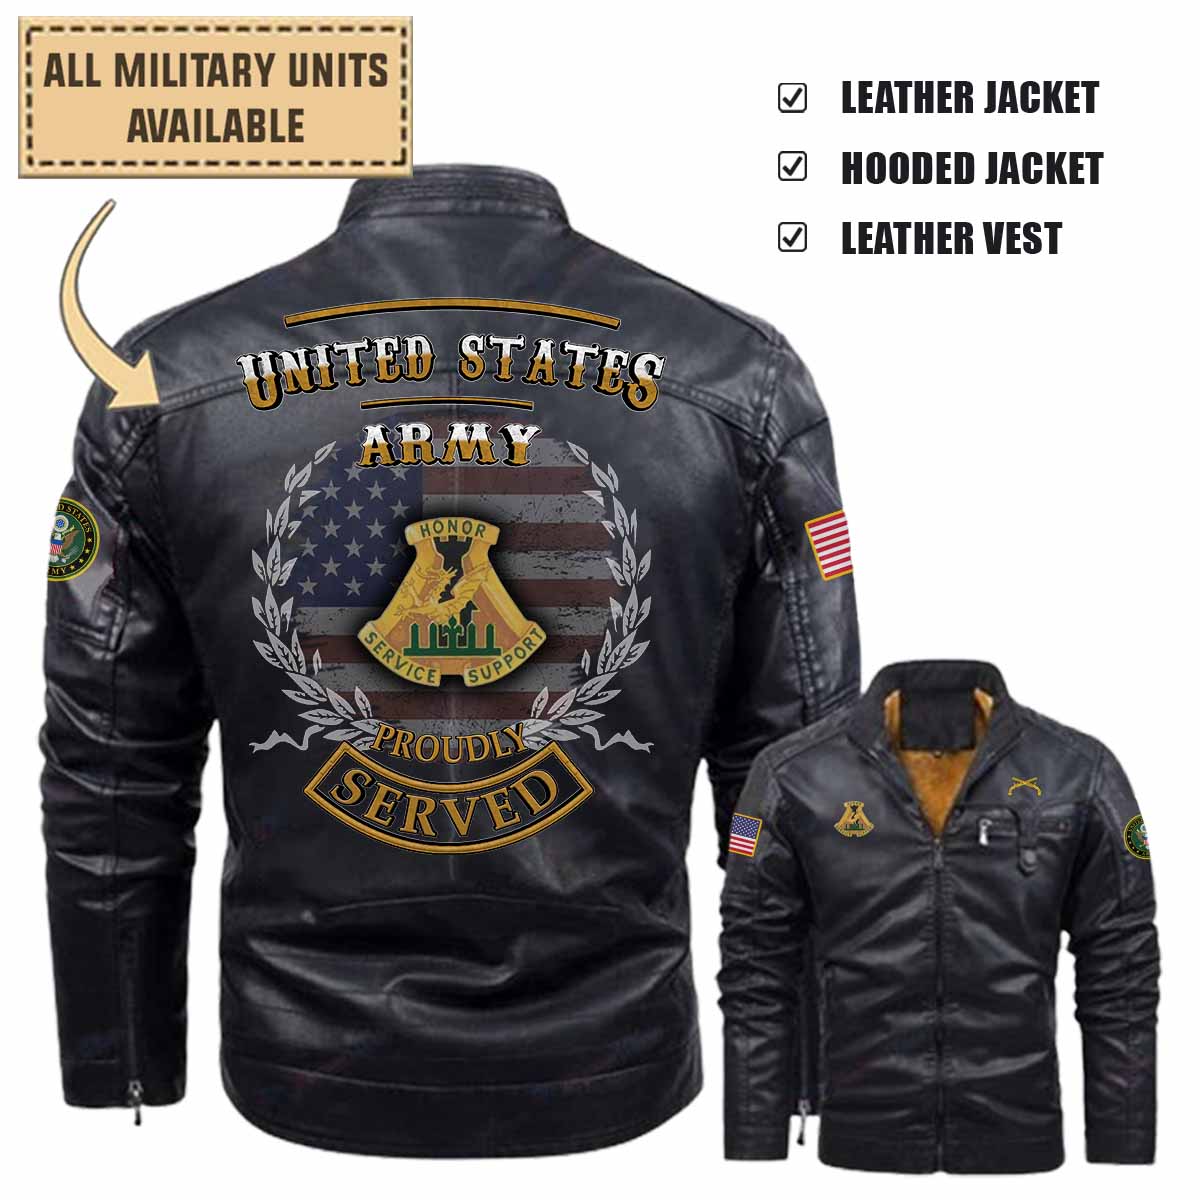 518th MP BN 518th Military Police Battalion_Military Leather Jacket and Vest